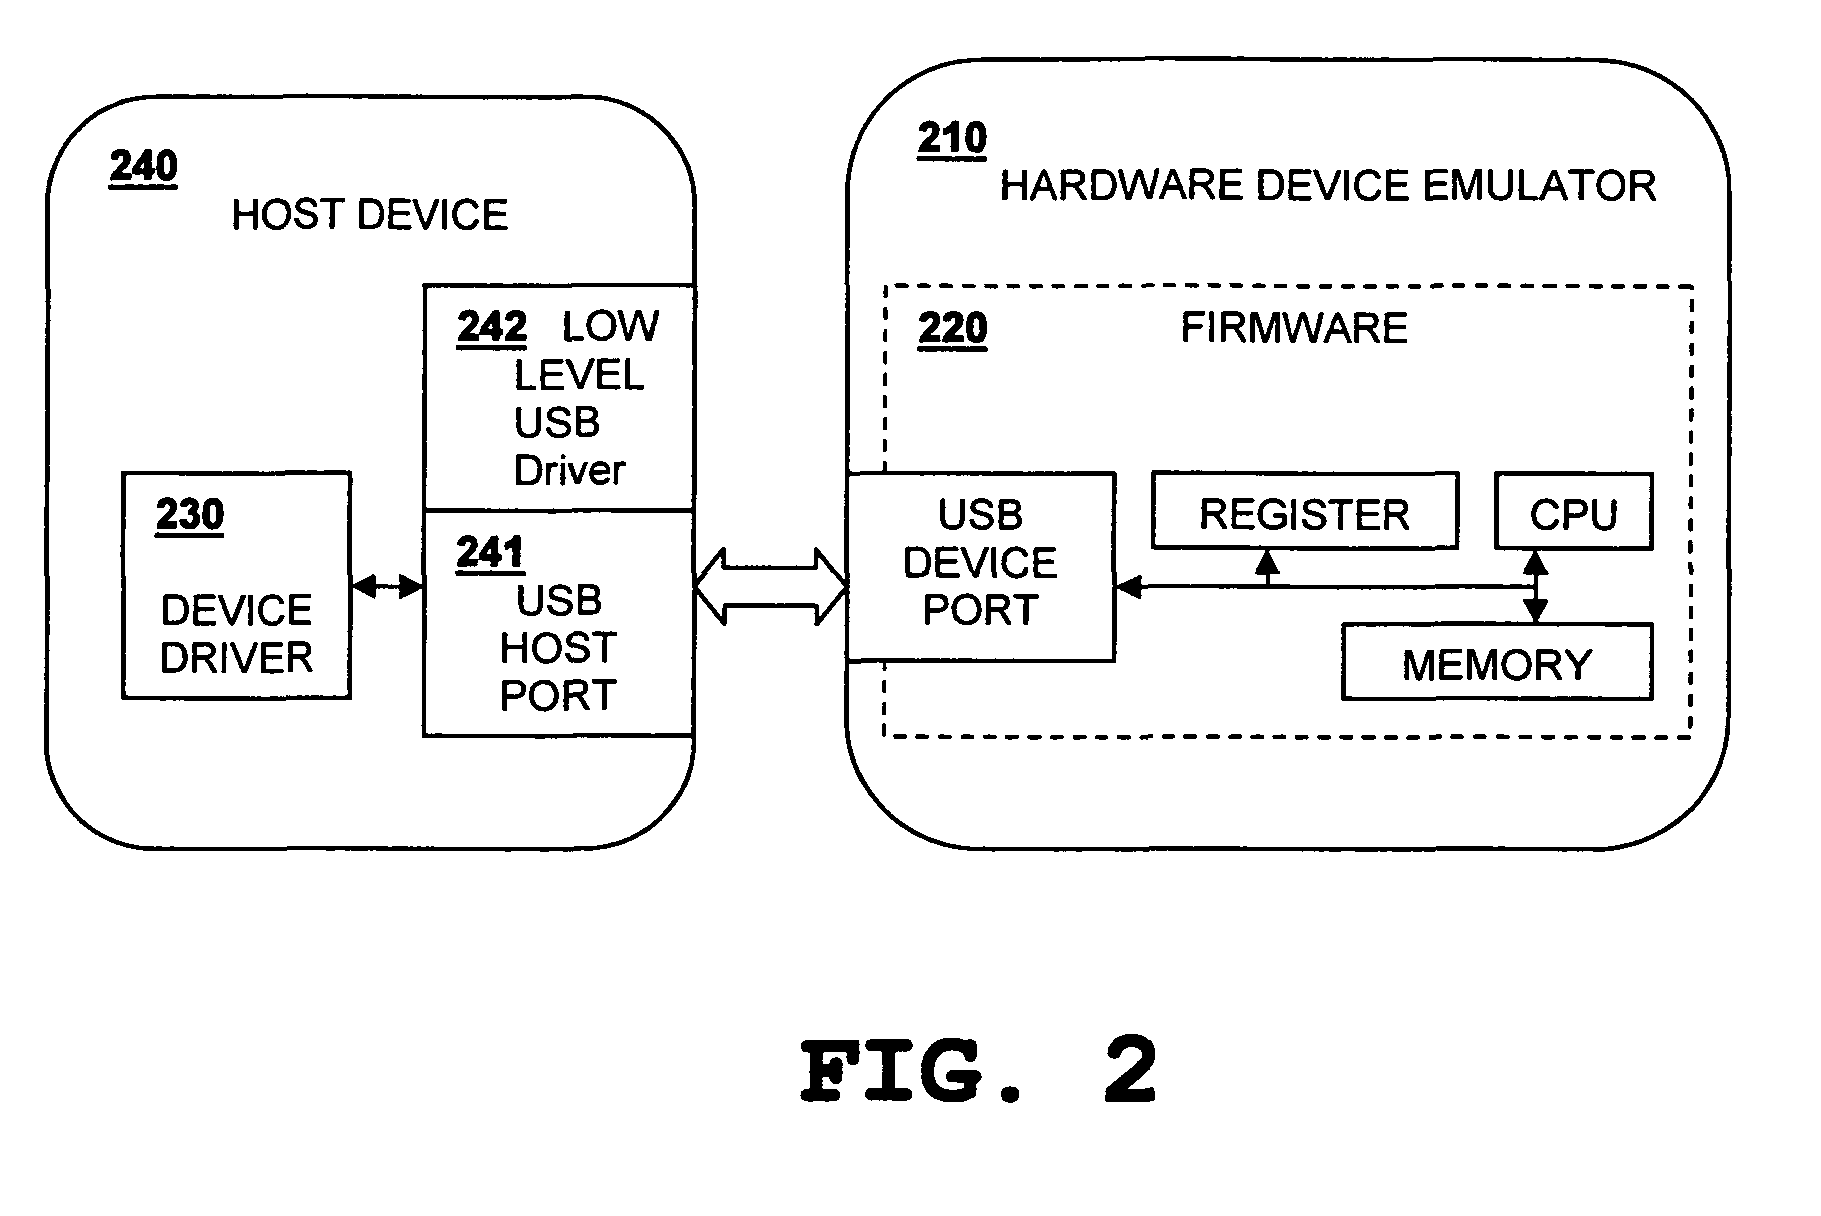 Method to change USB device descriptors from host to emulate a new device